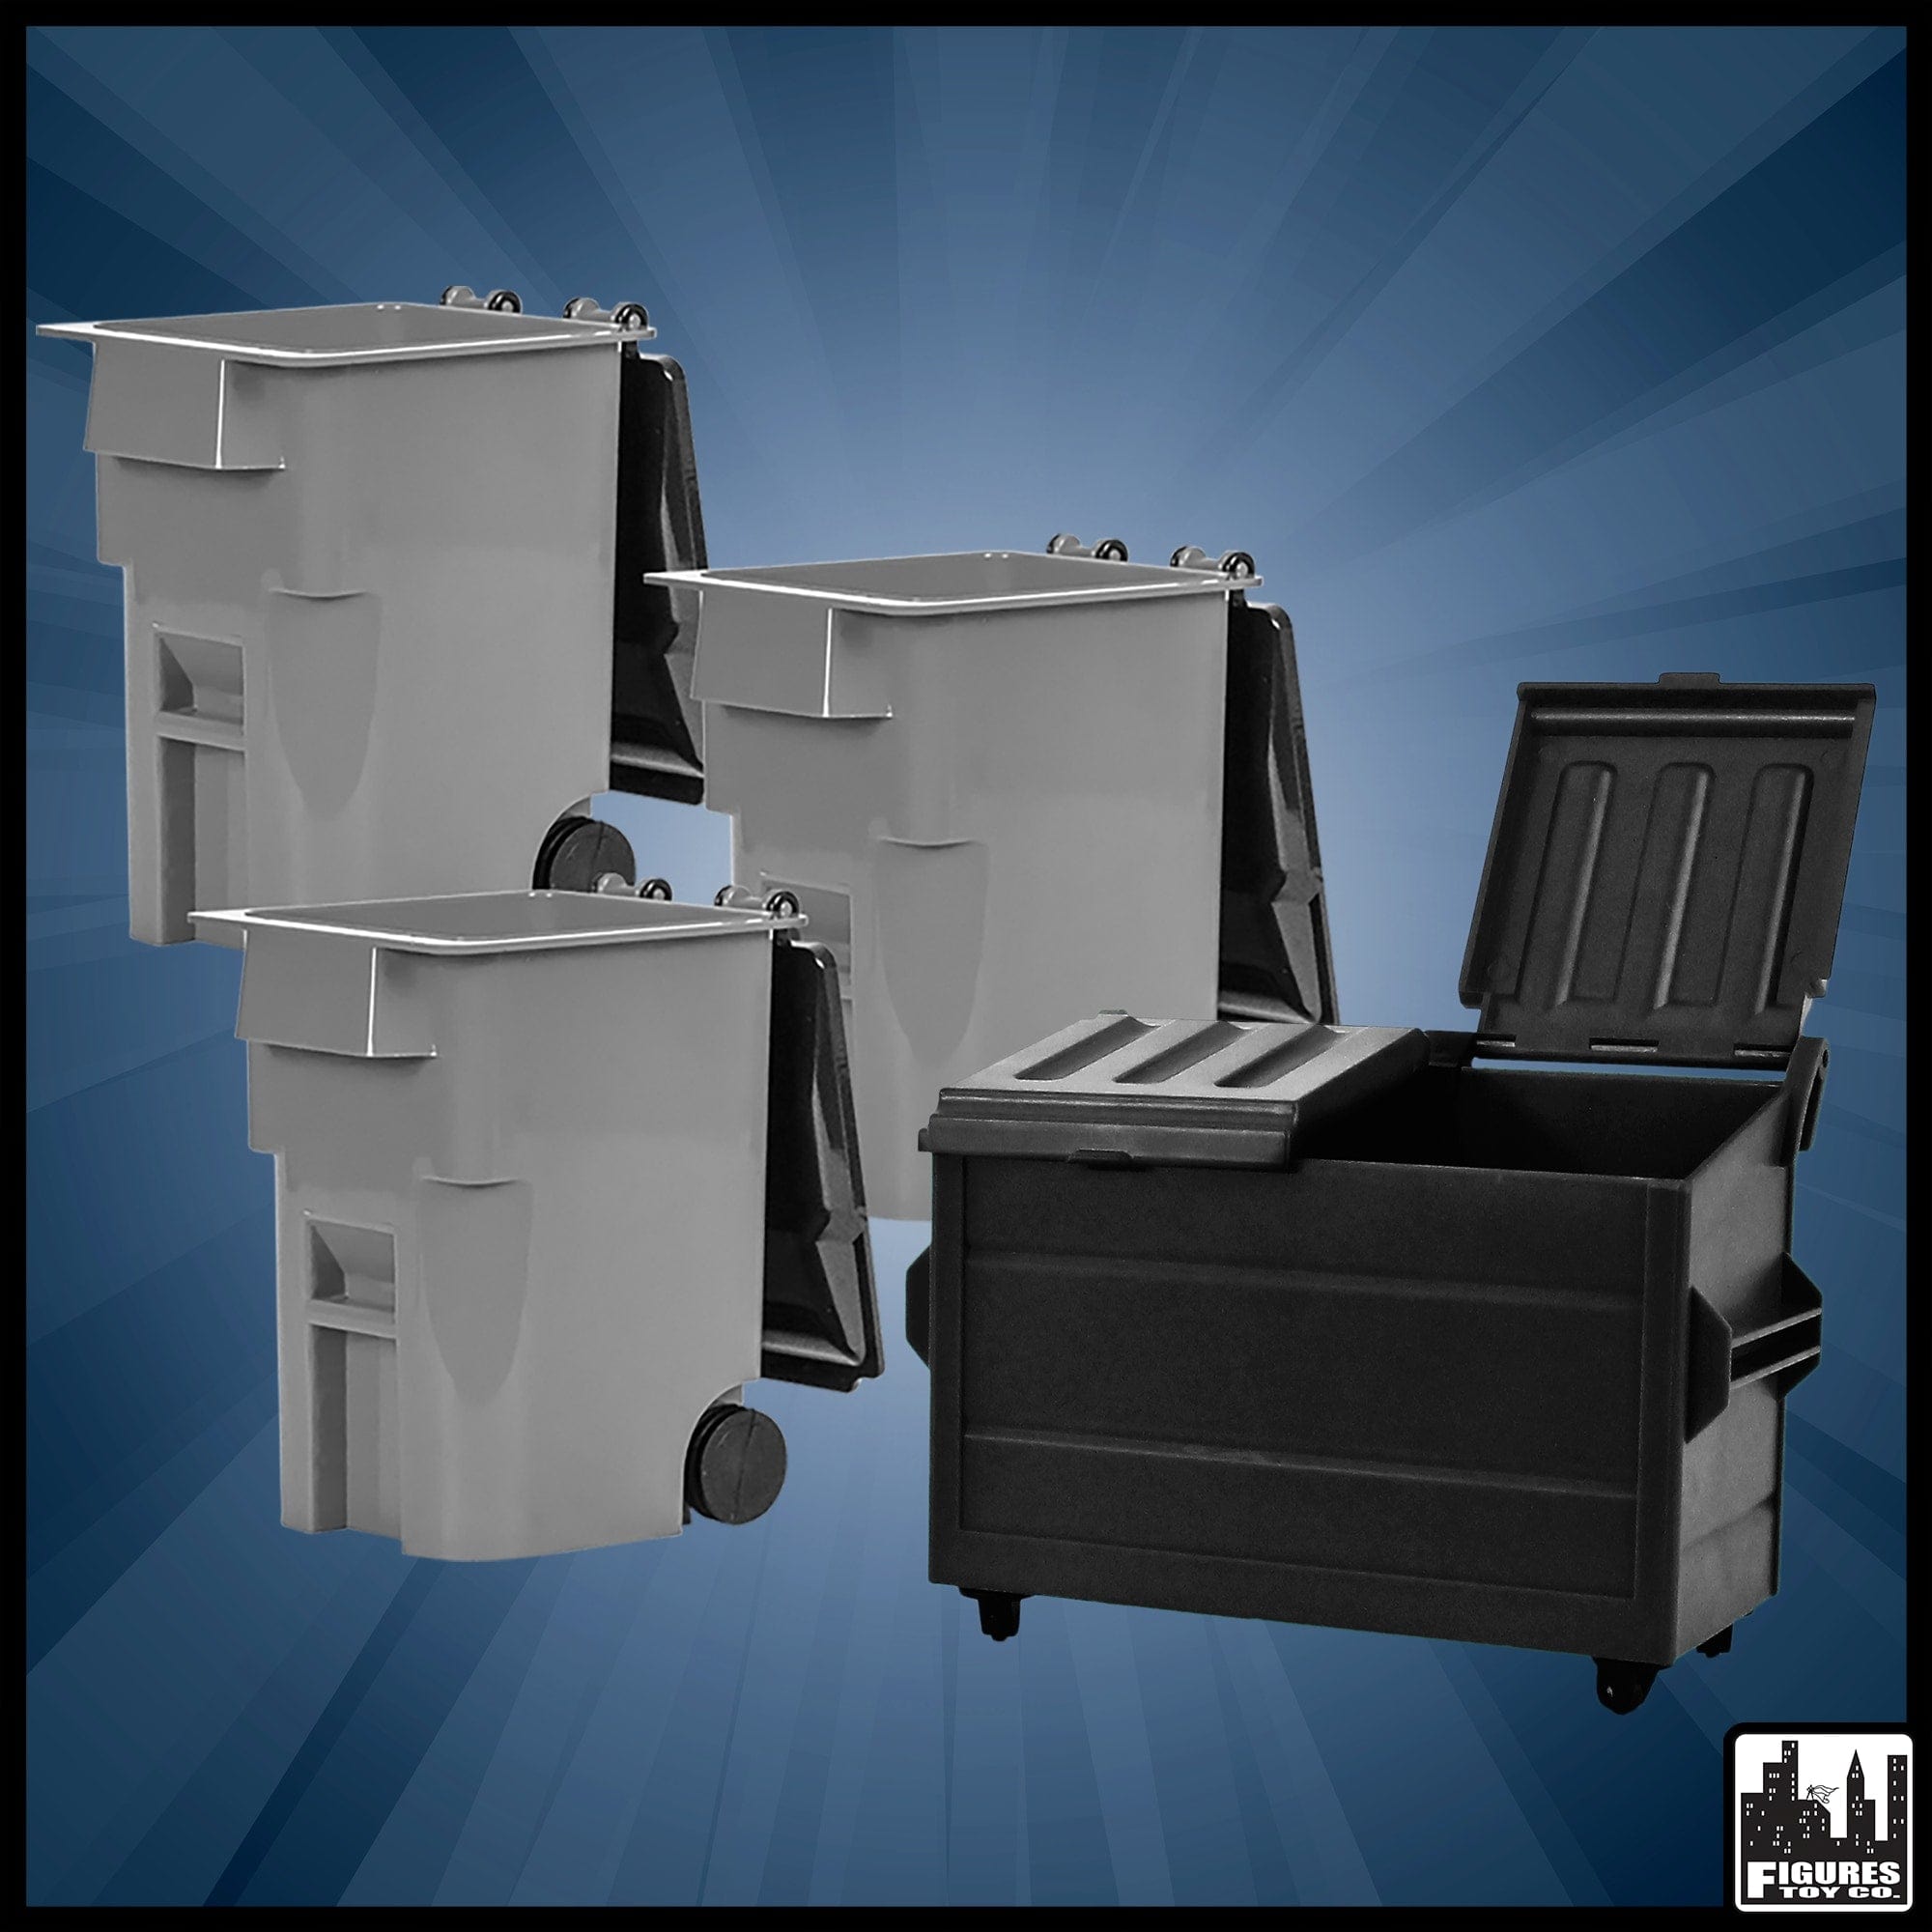 Black Dumpster & 3 Gray Trash Cans With Lid & Wheels for WWE Wrestling Action Figures